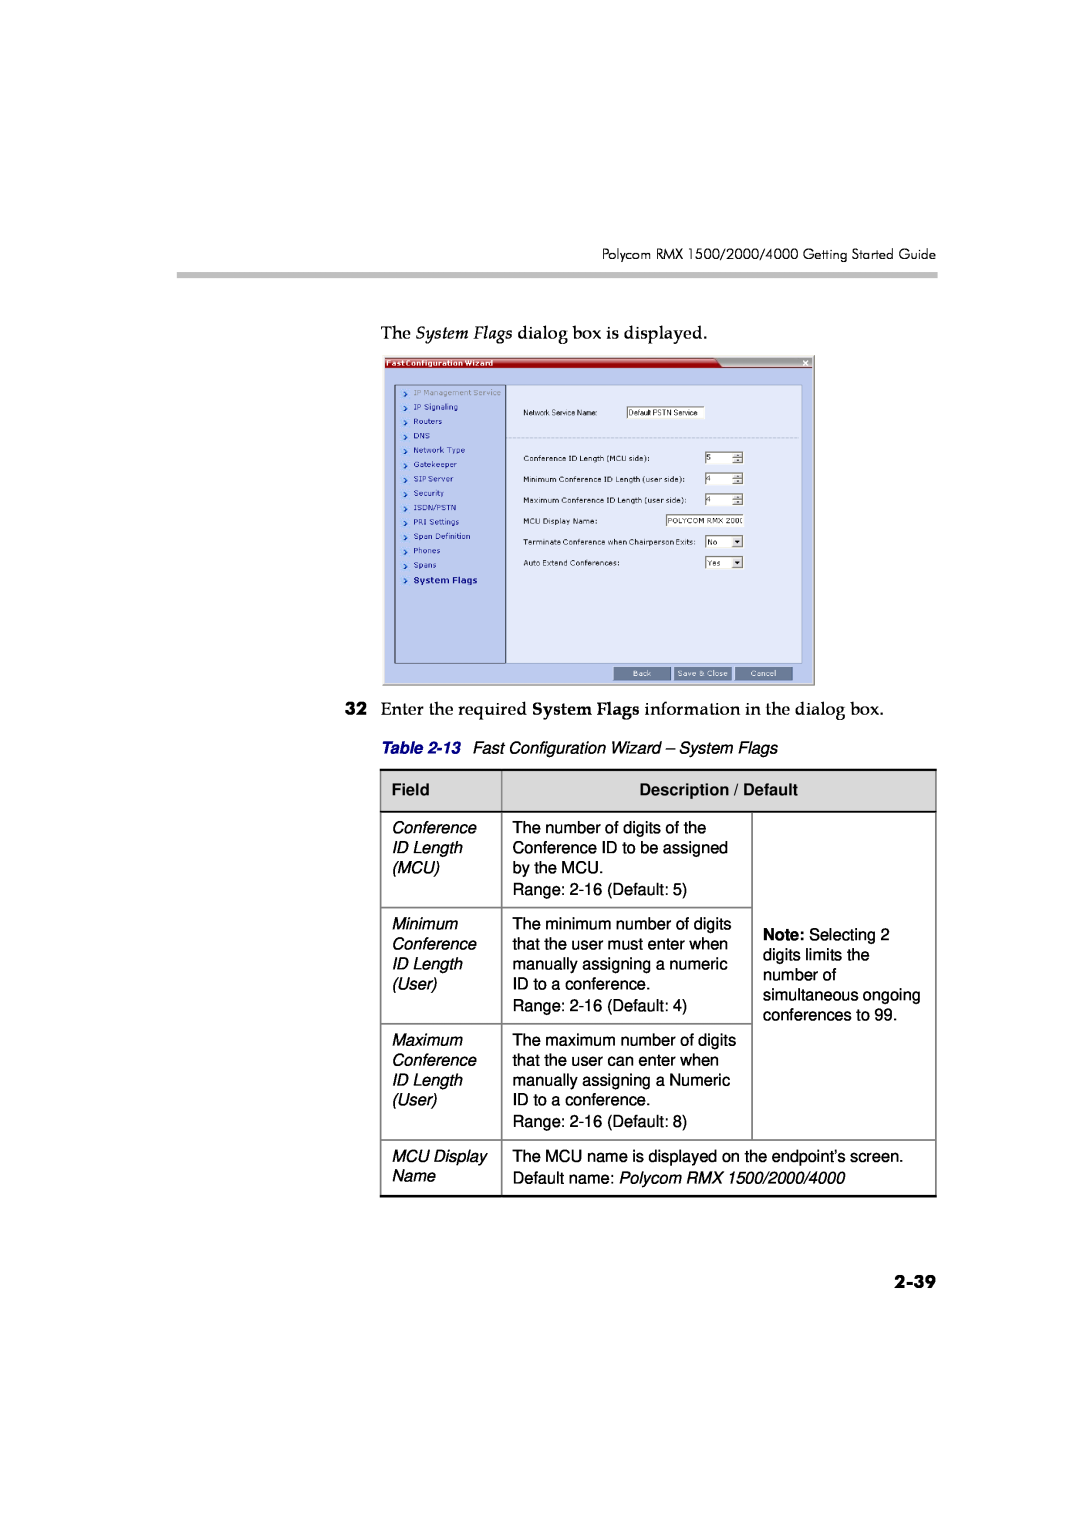 Polycom DOC2560A manual 2-39, The System Flags dialog box is displayed, Field, Description / Default 